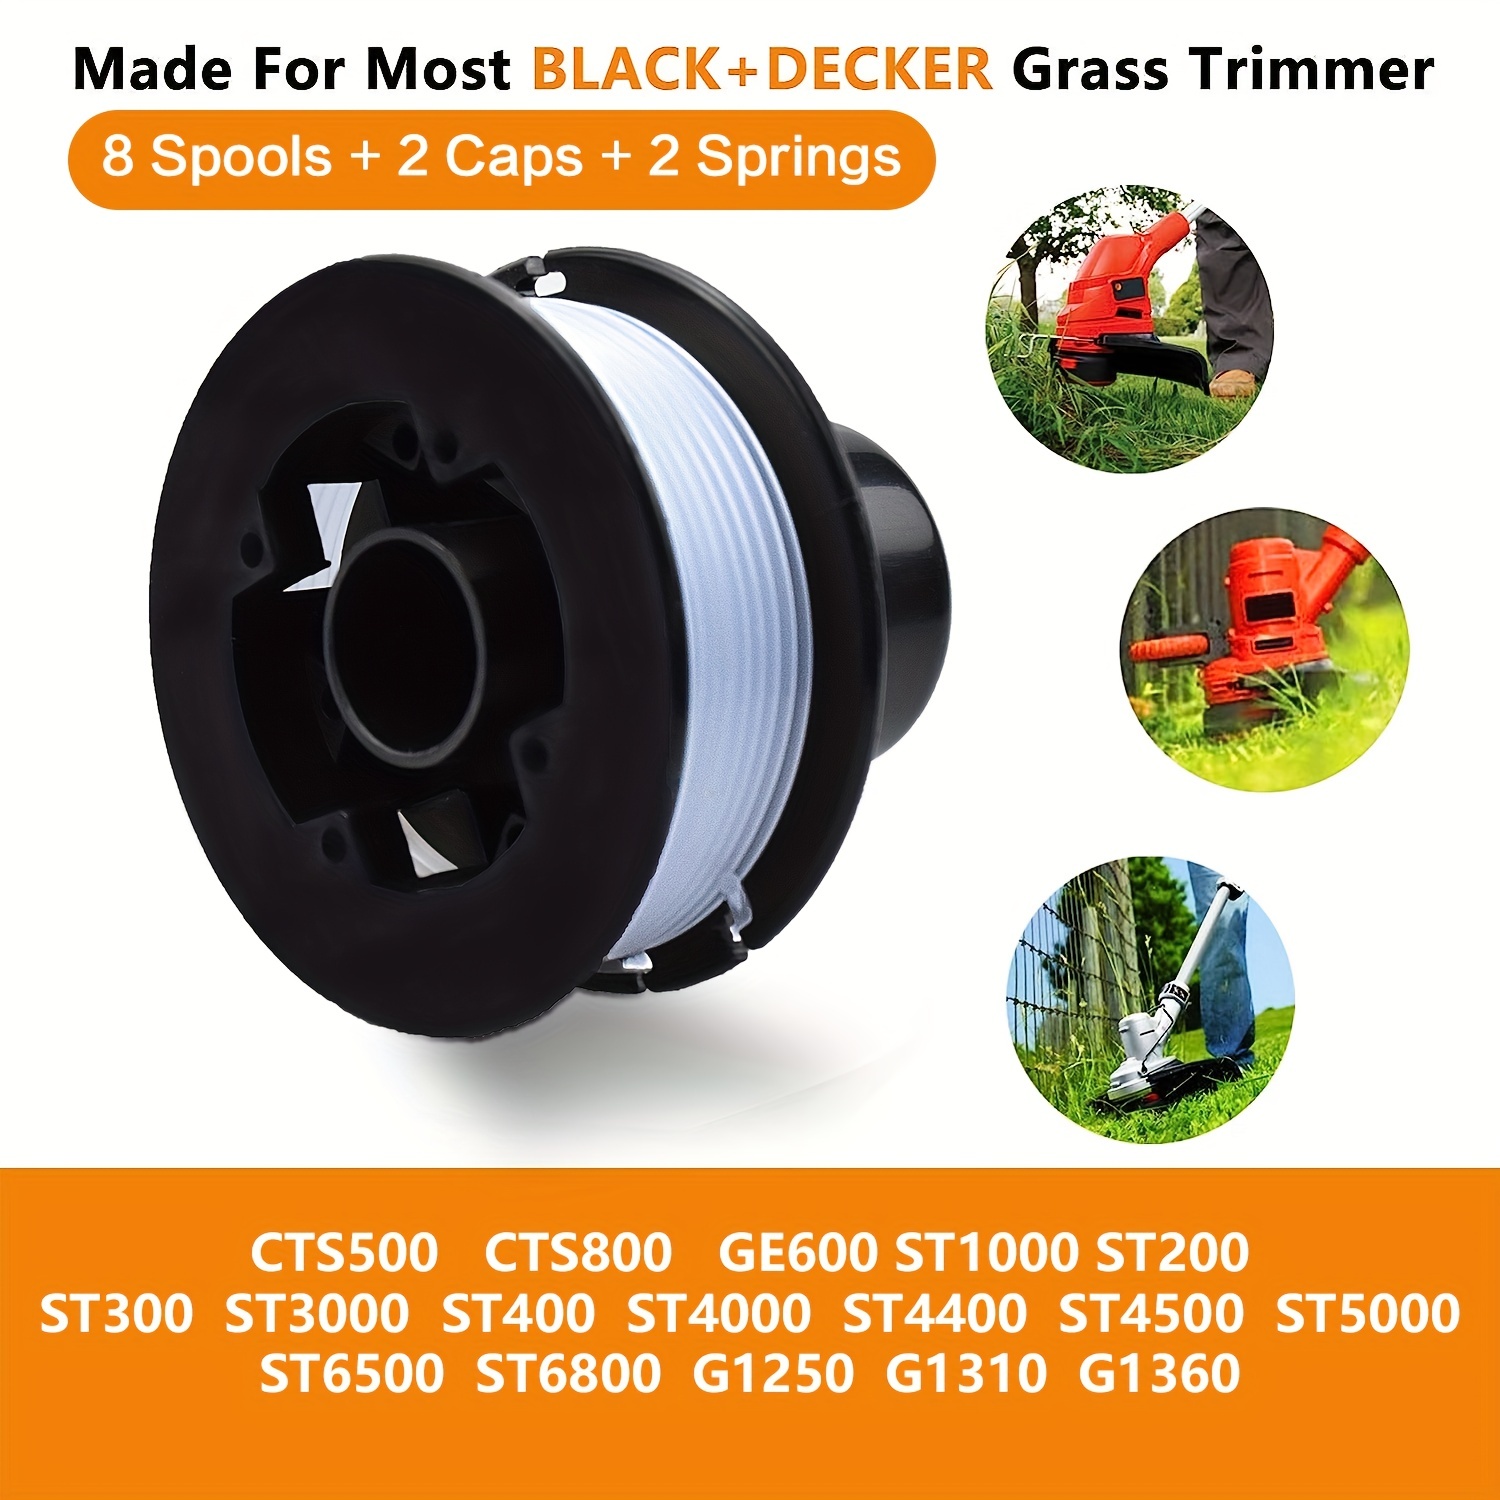 Replacement Rs-136-bkp & A6226-xj String Trimmer Spool Compatible